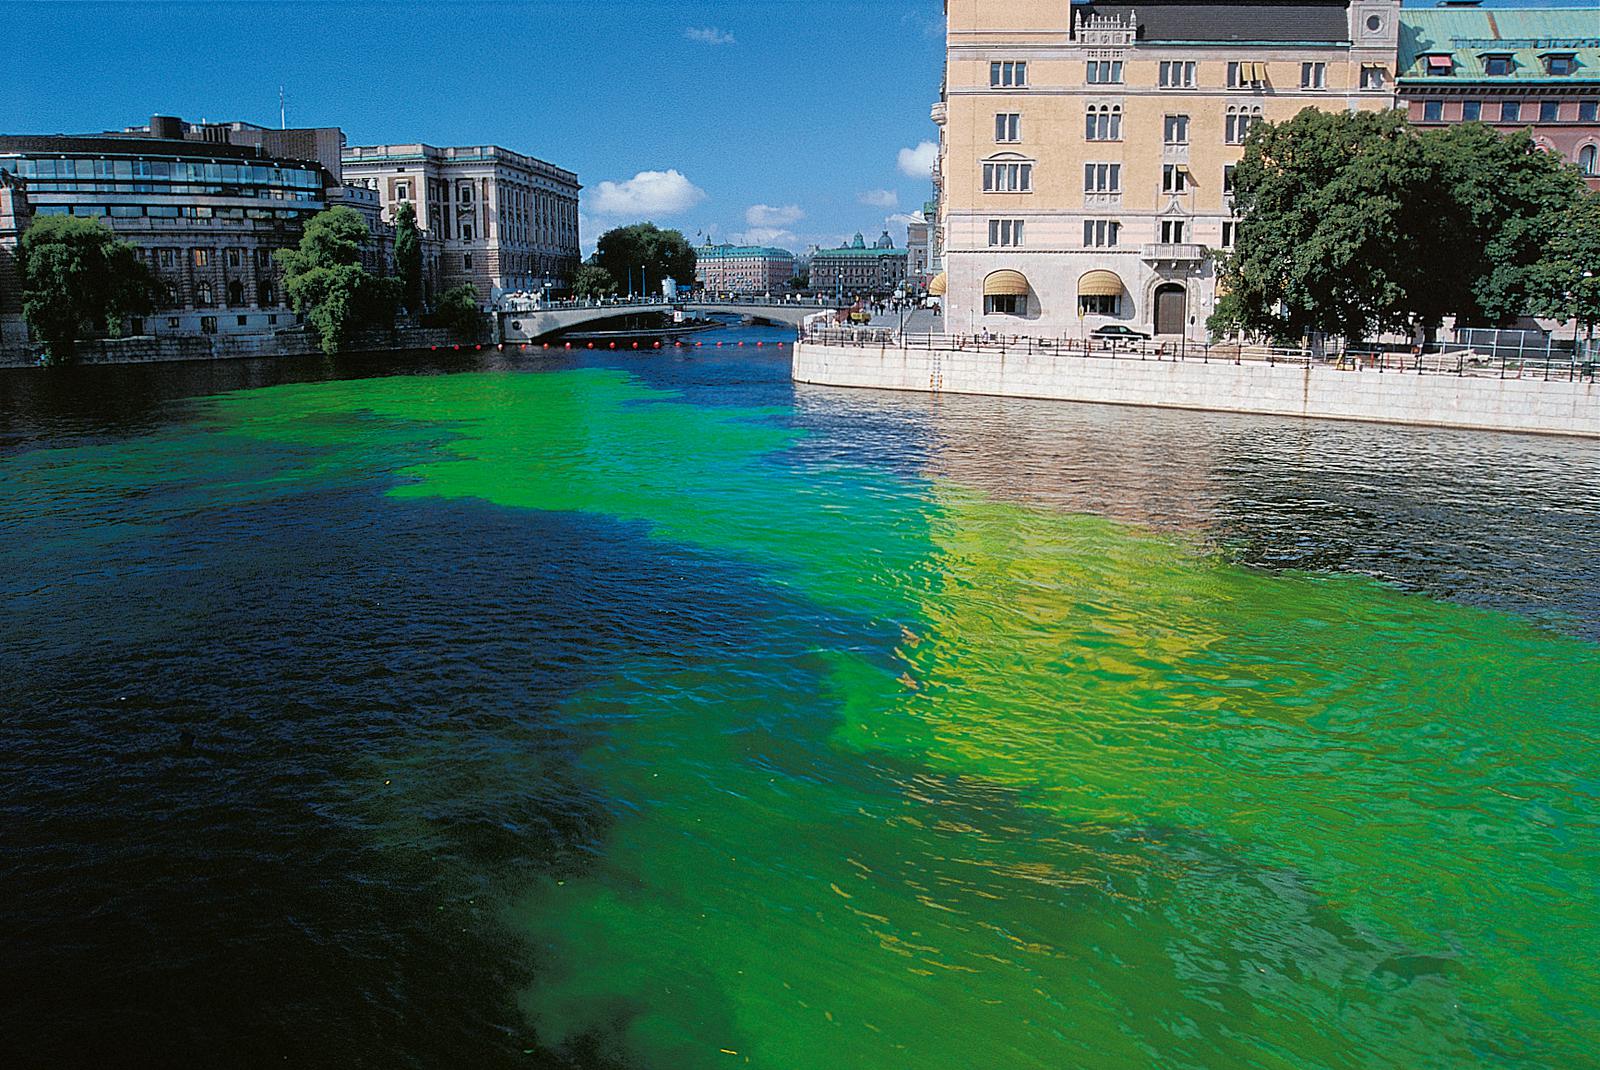 Olafur Eliasson's Green River Project in Stockholm